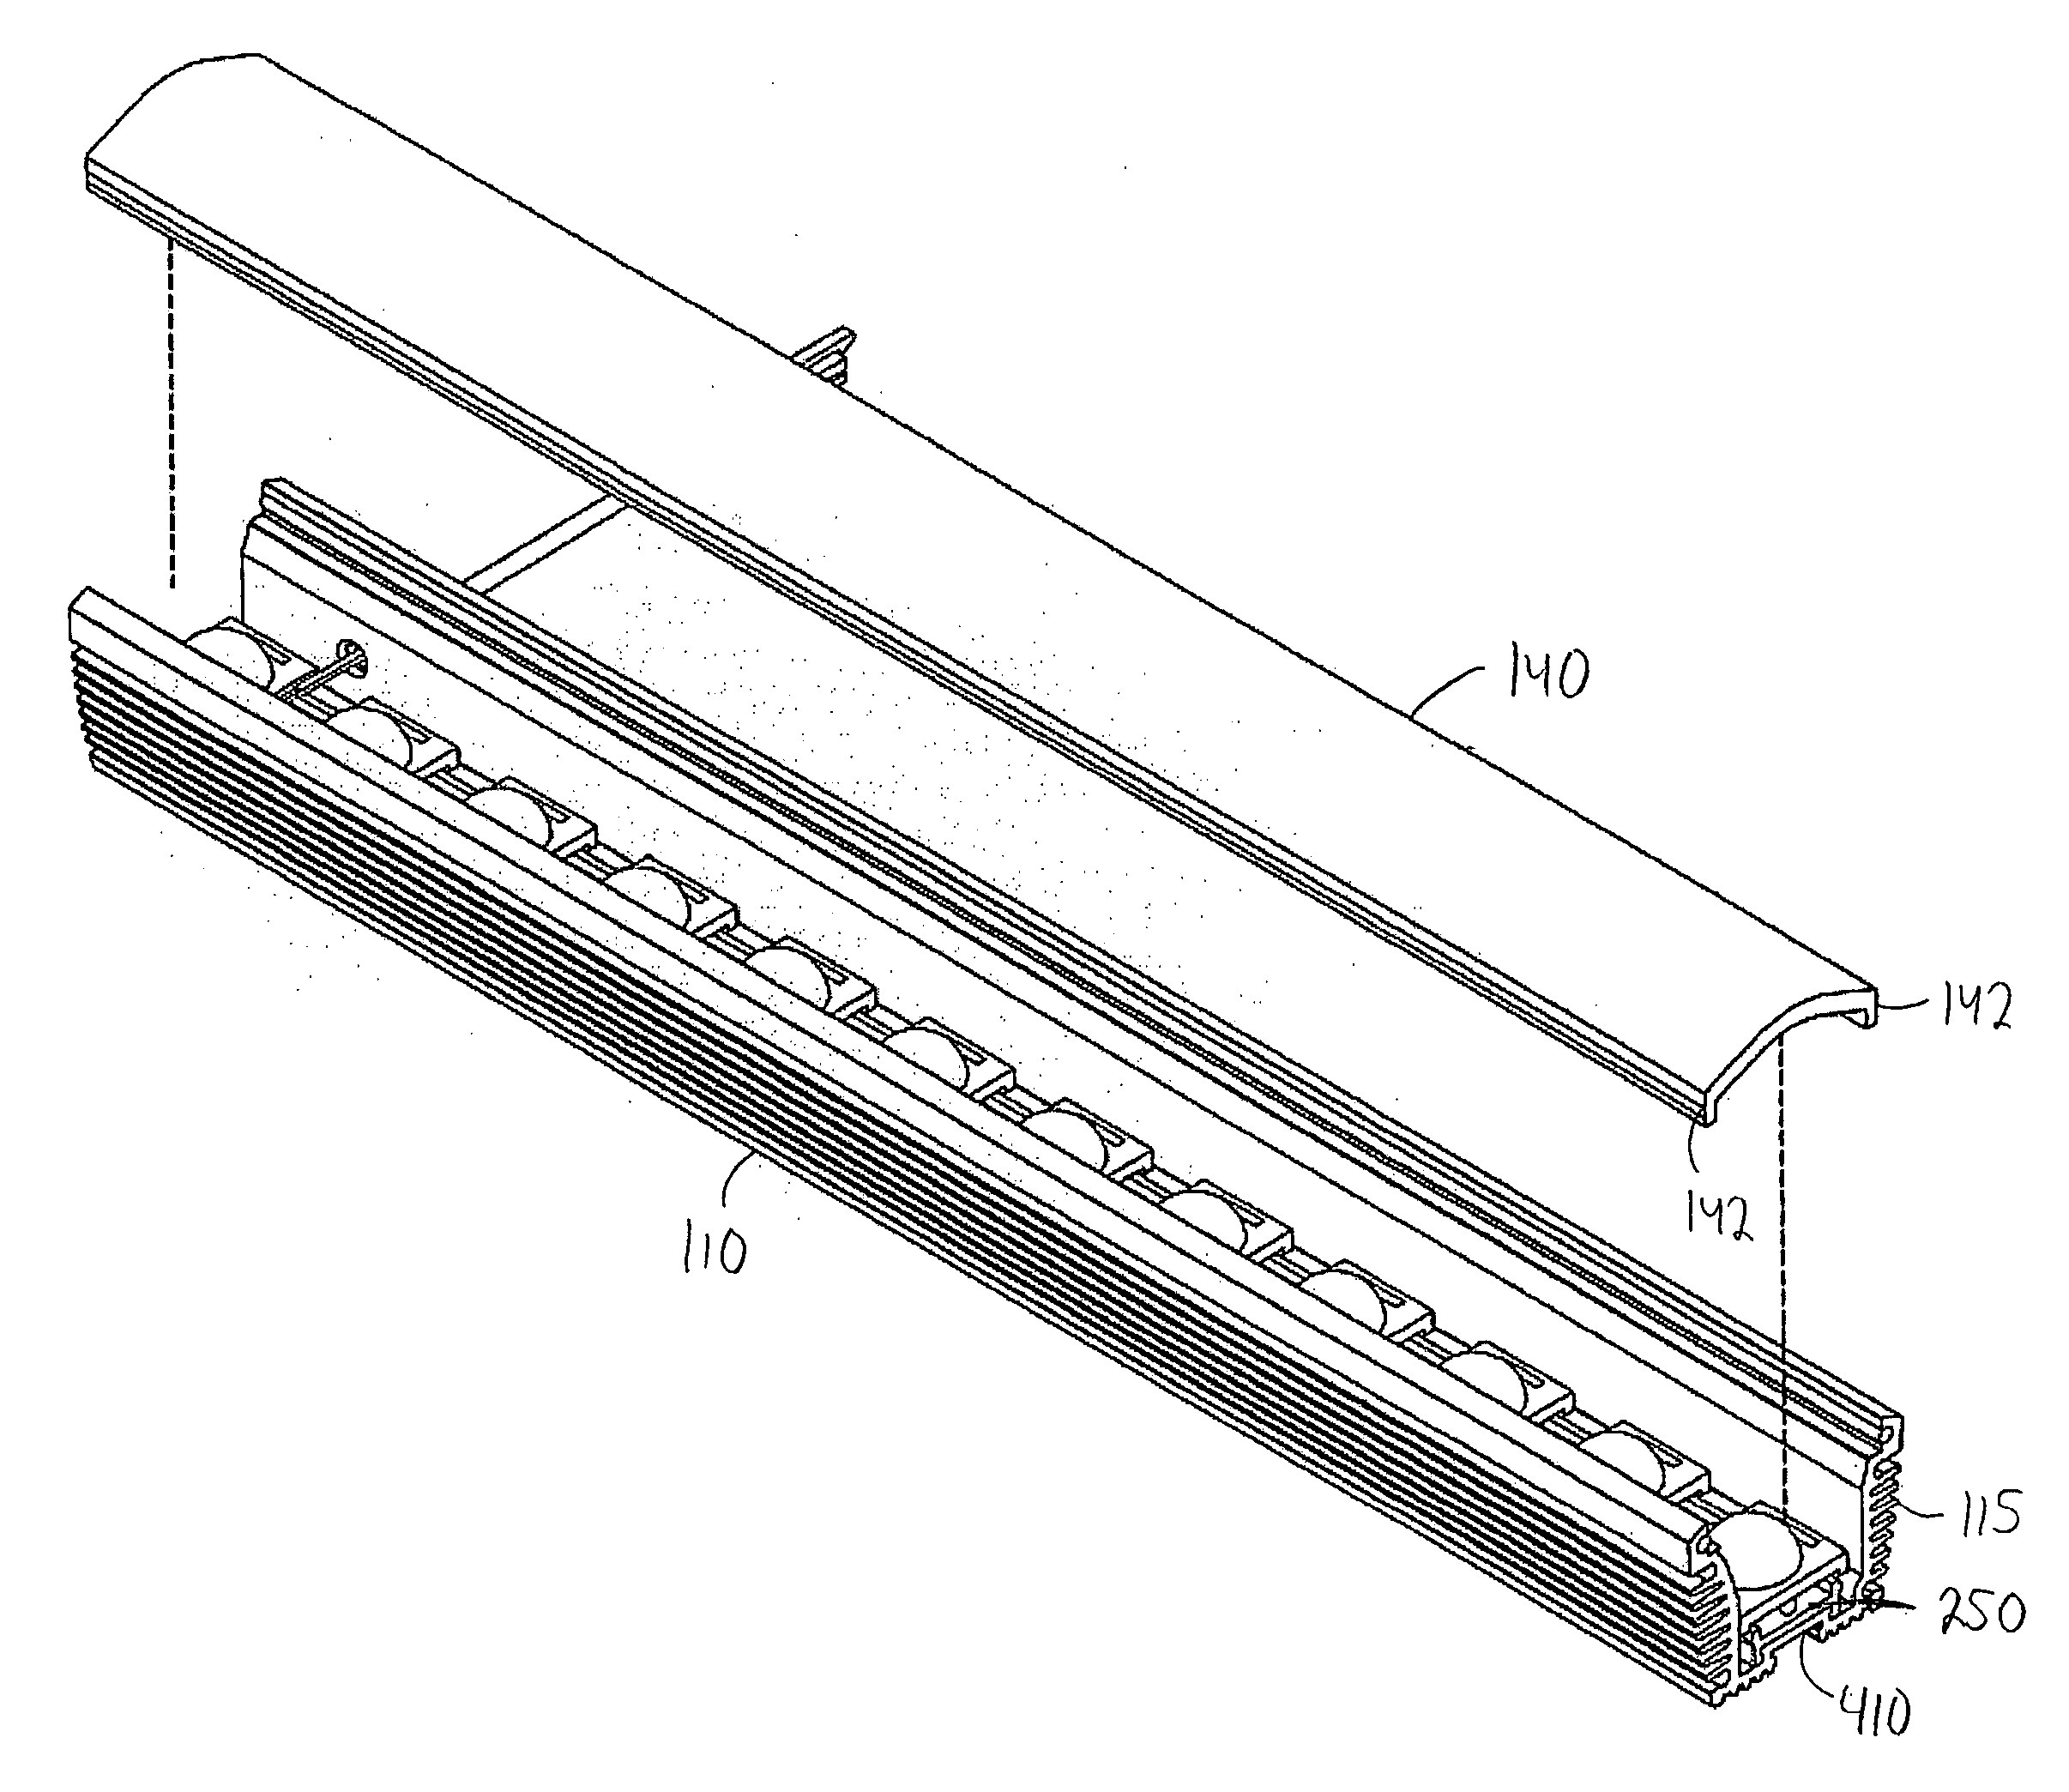 Linear lighting apparatus with improved heat dissipation